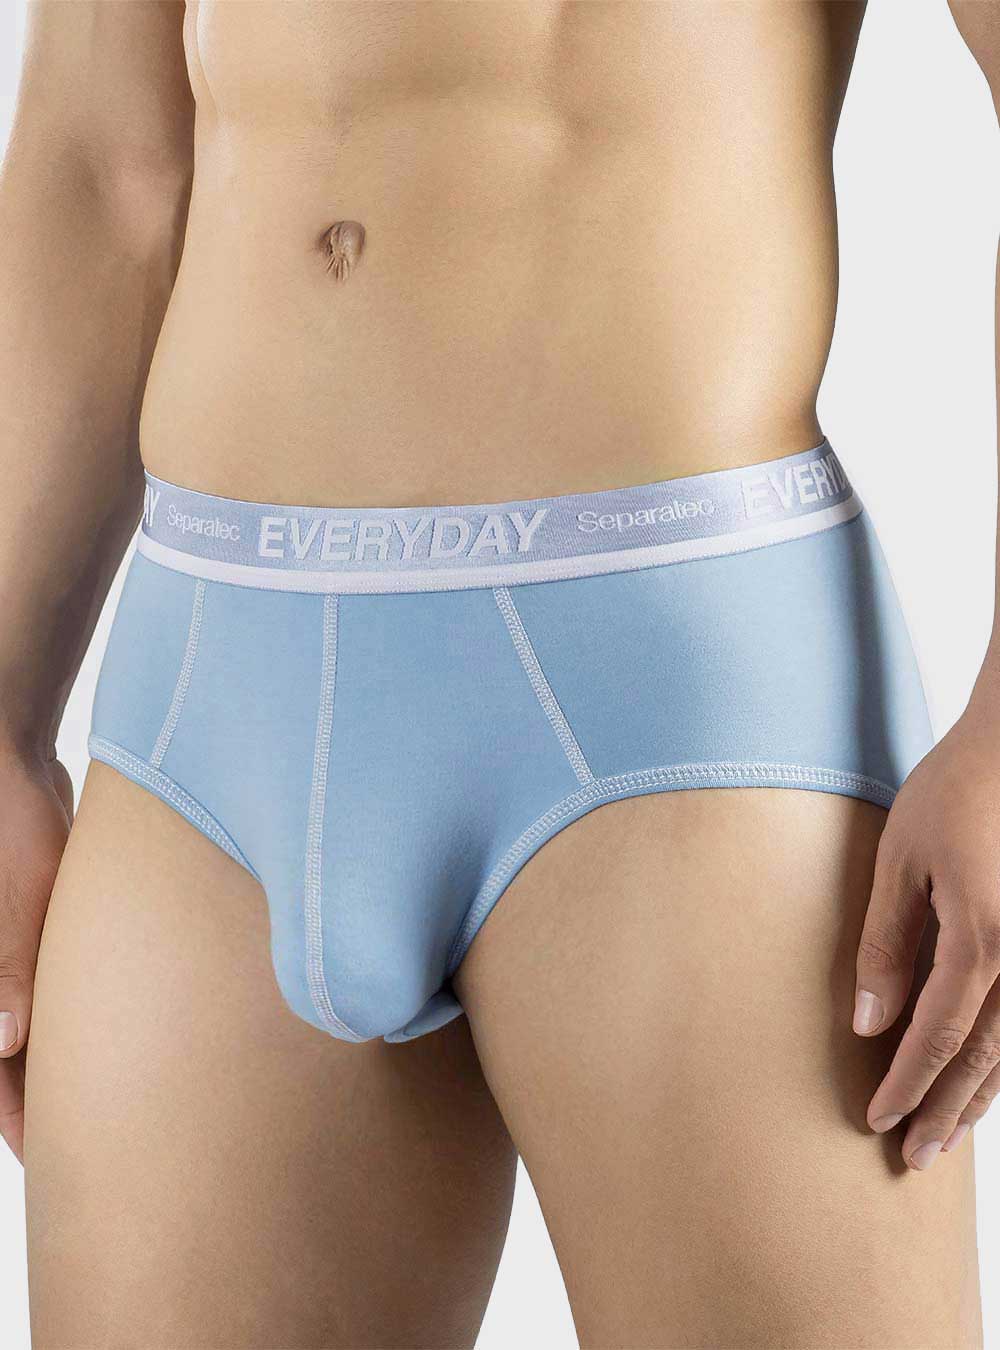 Colorful Everyday Briefs/Cotton 7Pack